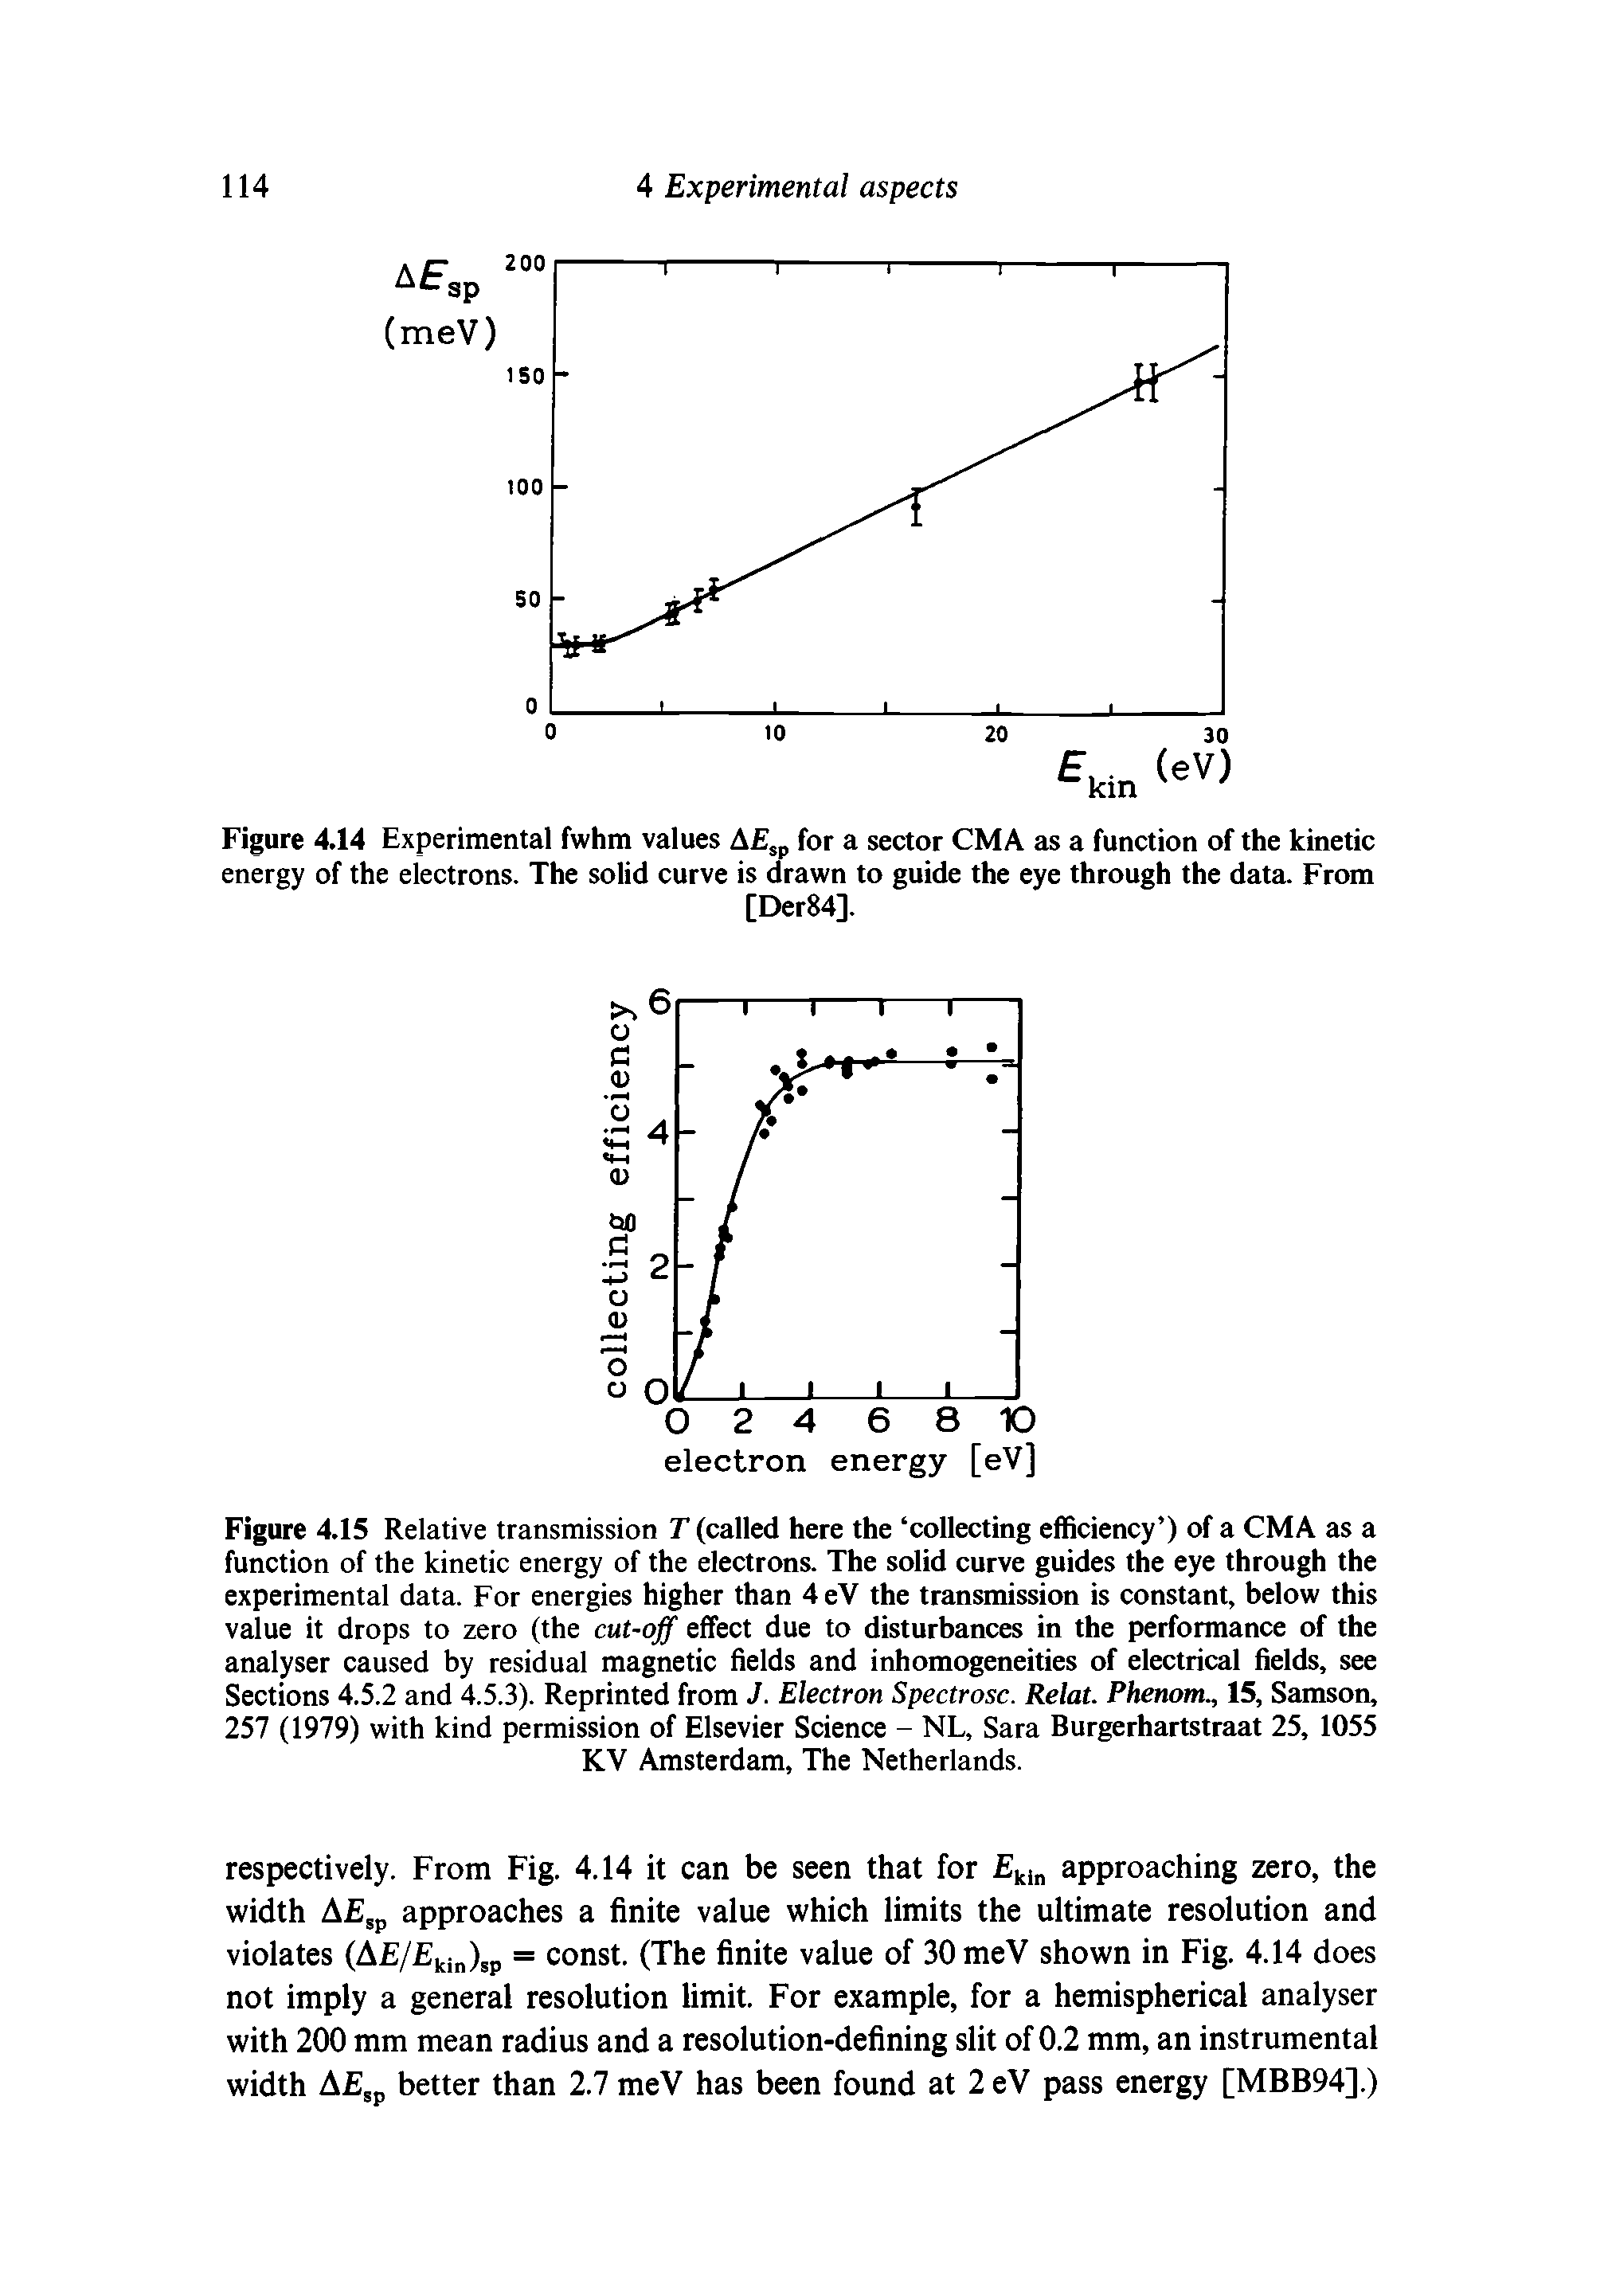 Figure 4.15 Relative transmission T (called here the collecting efficiency ) of a CMA as a function of the kinetic energy of the electrons. The solid curve guides the eye through the experimental data. For energies higher than 4eV the transmission is constant, below this value it drops to zero (the cut-off effect due to disturbances in the performance of the analyser caused by residual magnetic fields and inhomogeneities of electrical fields, see Sections 4.5.2 and 4.5.3). Reprinted from J. Electron Spectrosc. Relat. Phenom., 15, Samson, 257 (1979) with kind permission of Elsevier Science - NL, Sara Burgerhartstraat 25, 1055 KV Amsterdam, The Netherlands.